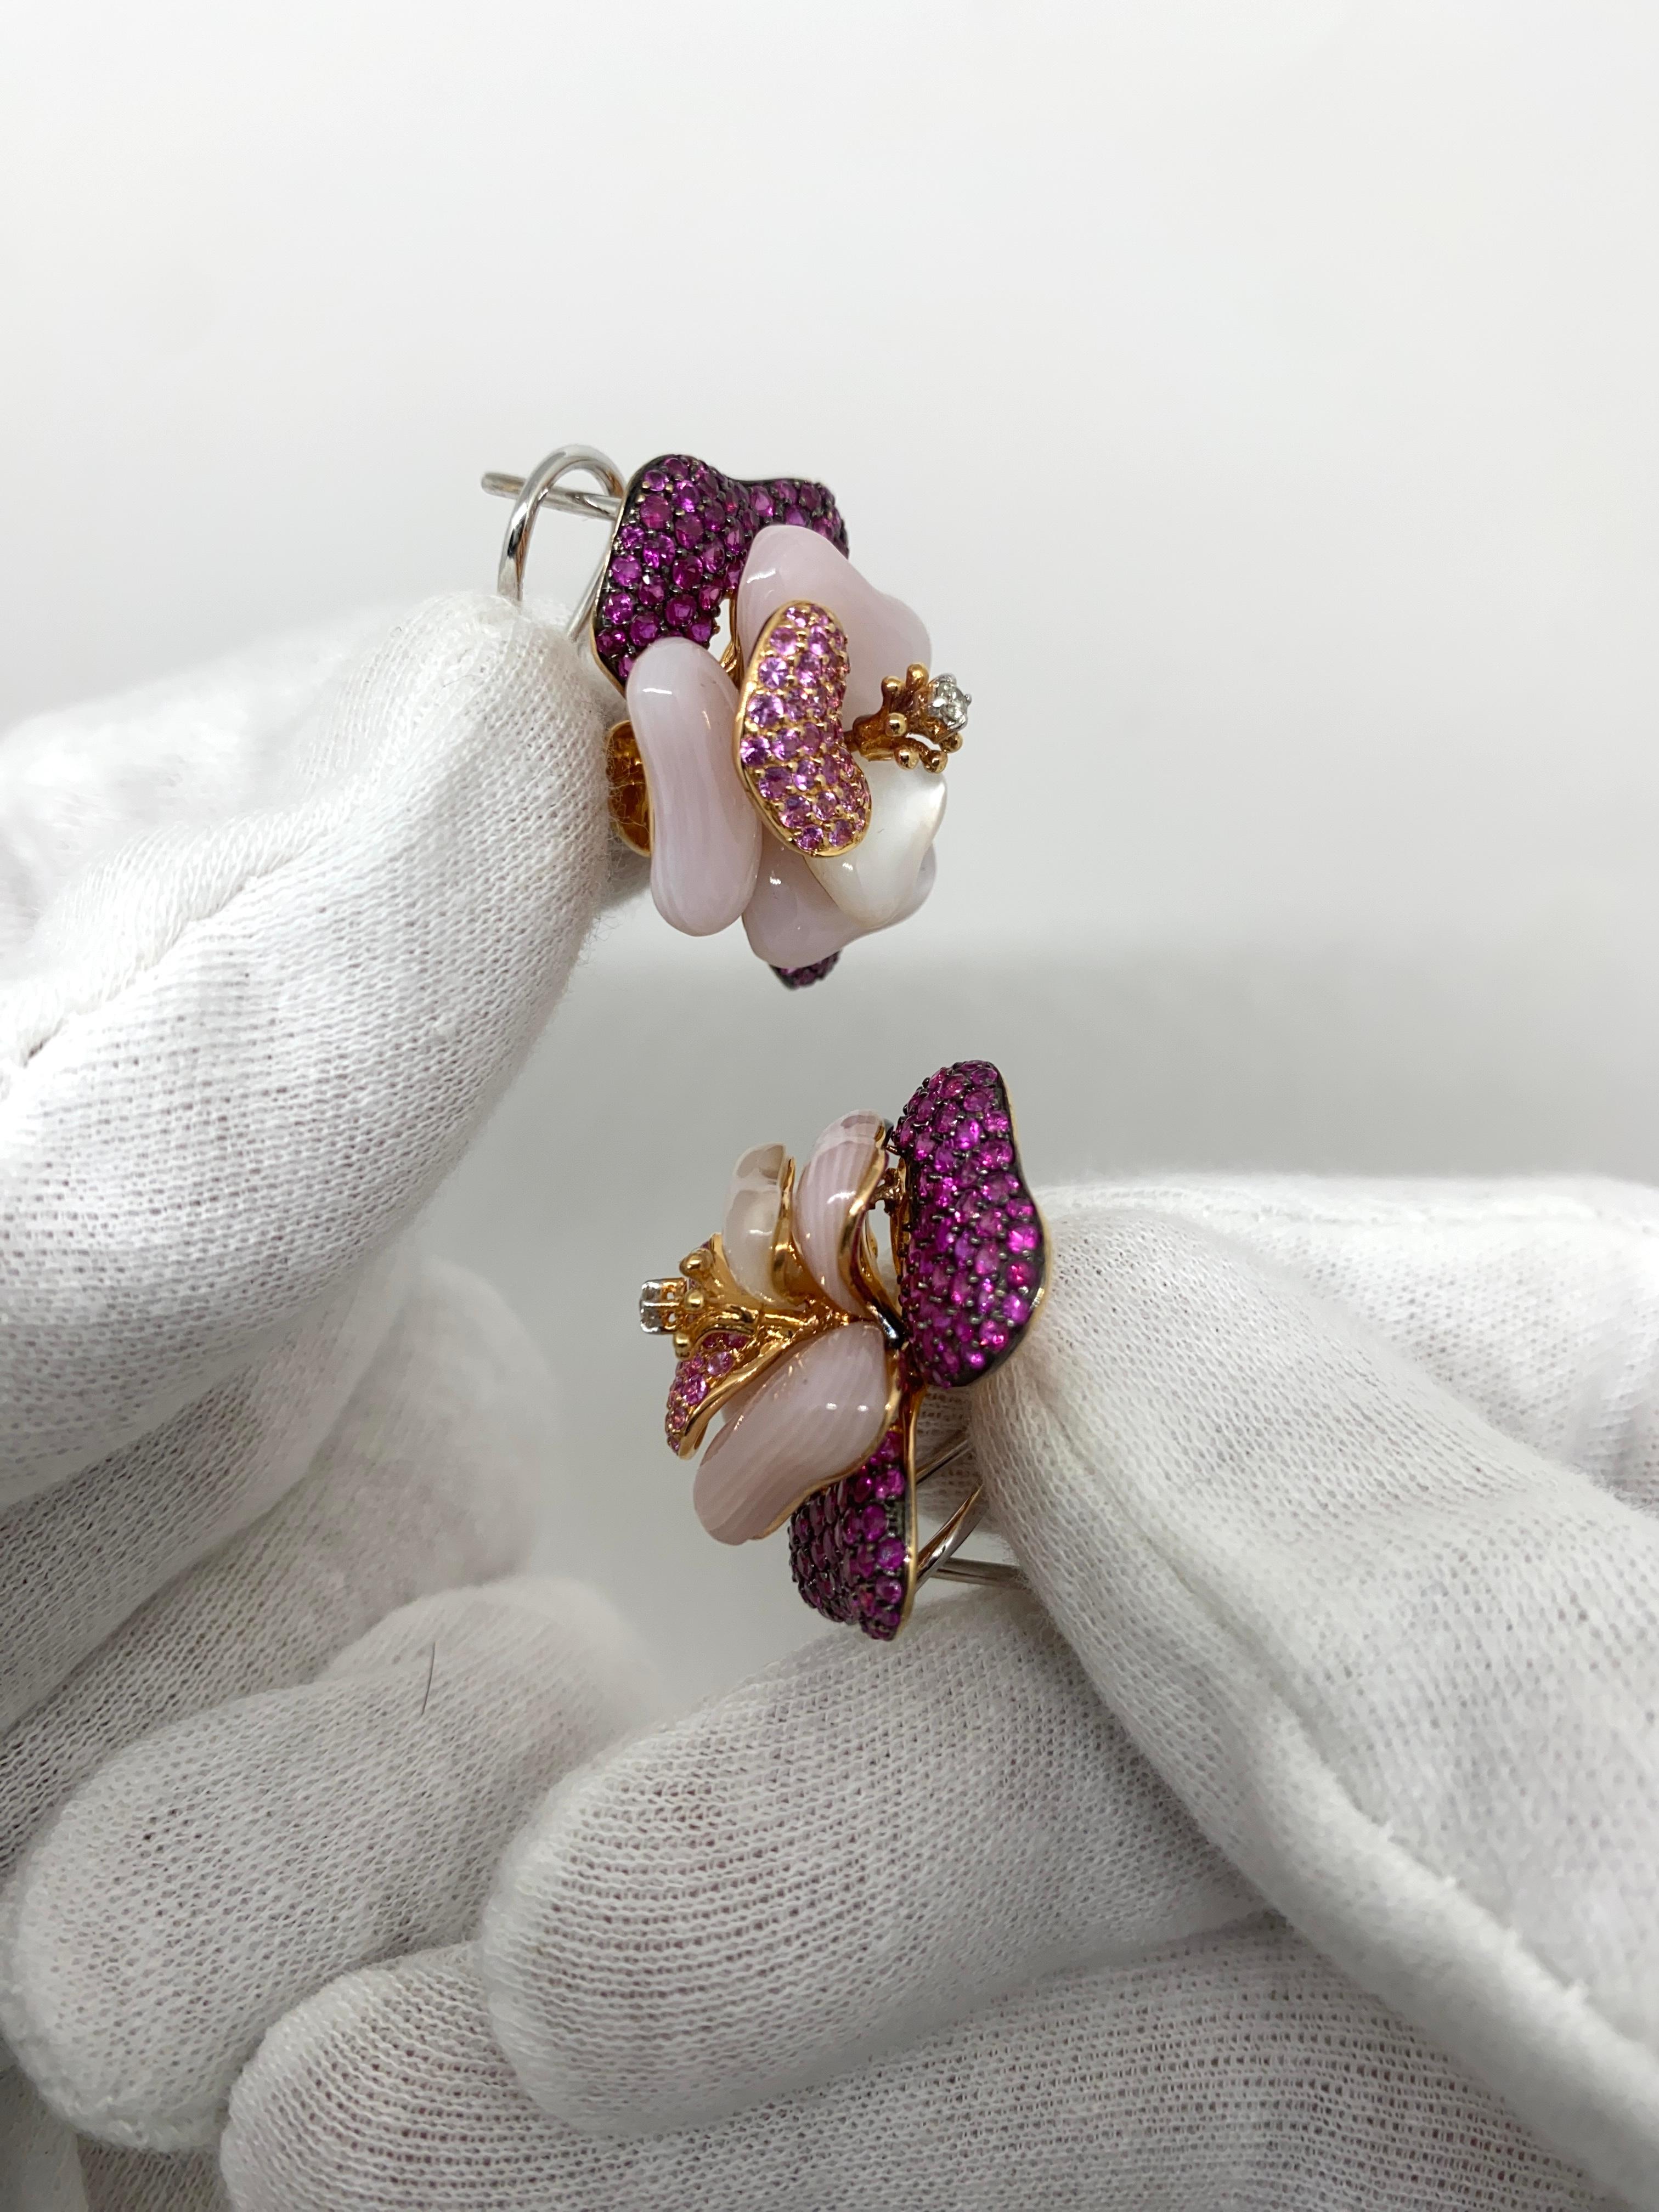 18kt Rose Gold Earrings Flowers 5.0ct Pink Sapphires, Mother of Pear & Diamond In New Condition For Sale In Bergamo, BG